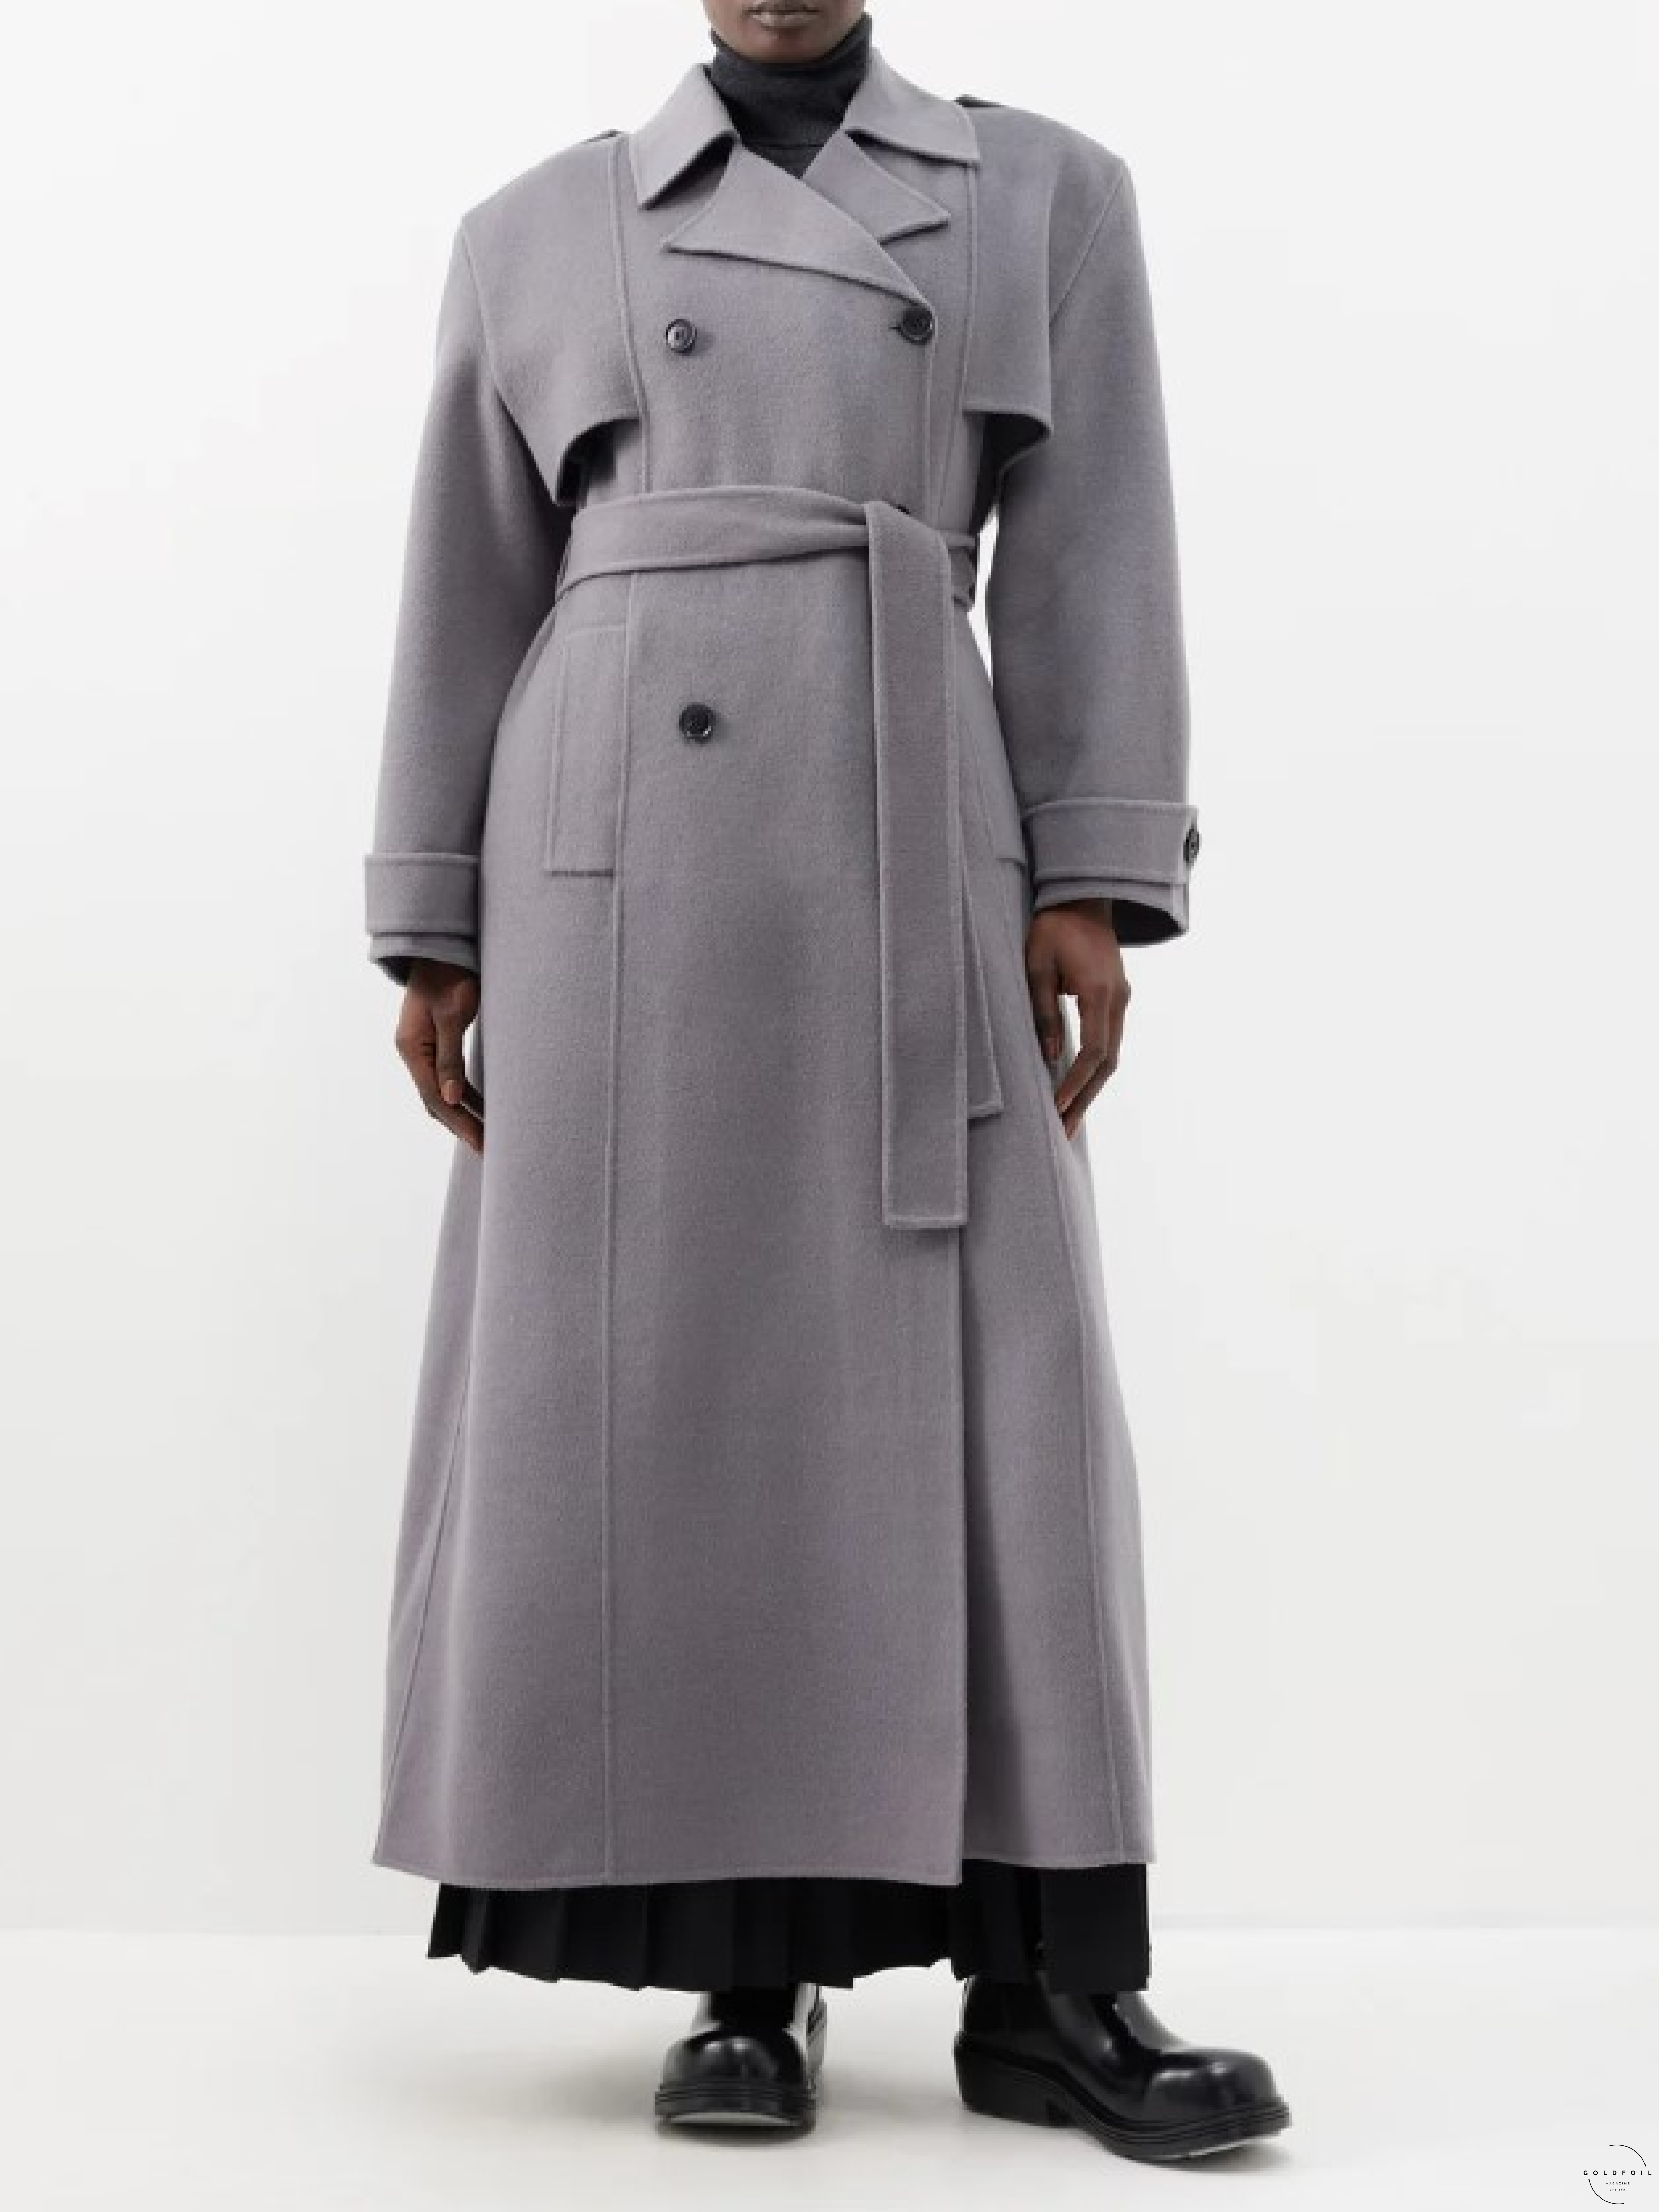 The frankie shop floor long double breasted grey coat